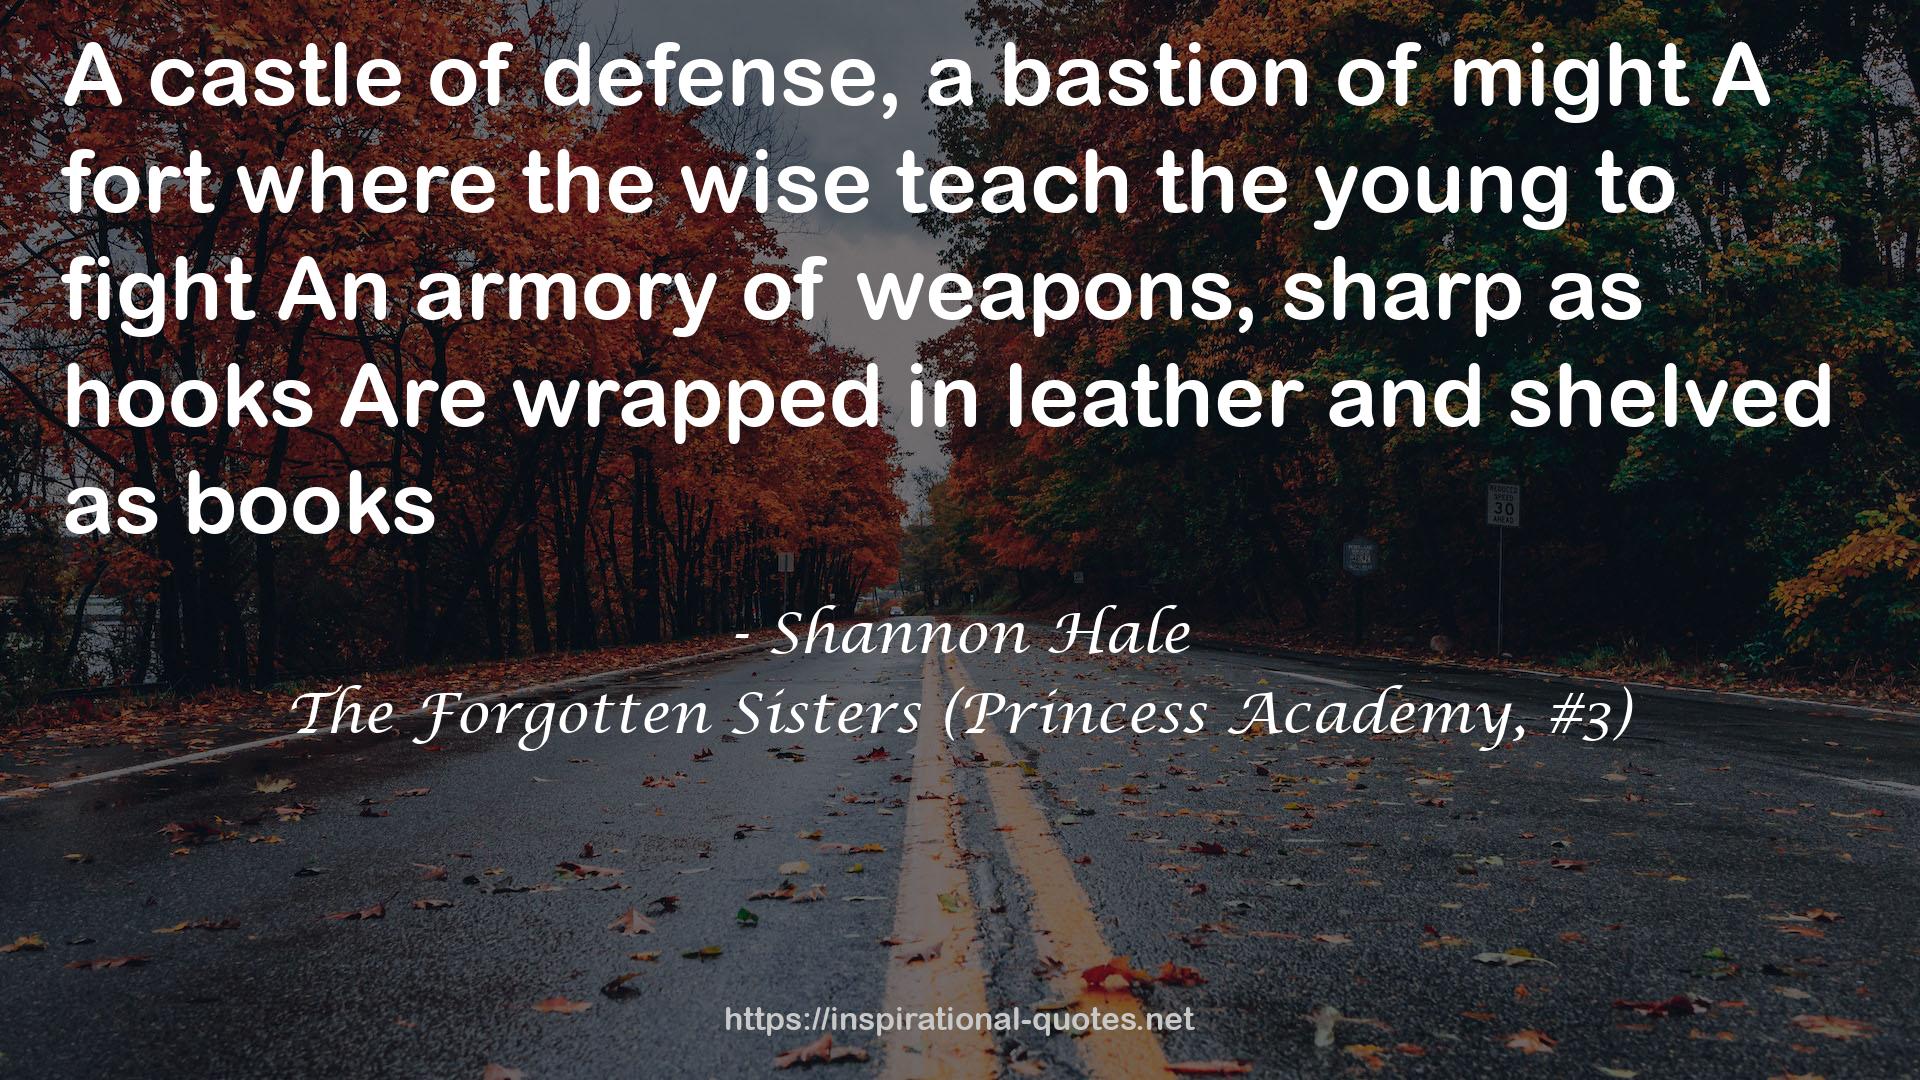 The Forgotten Sisters (Princess Academy, #3) QUOTES